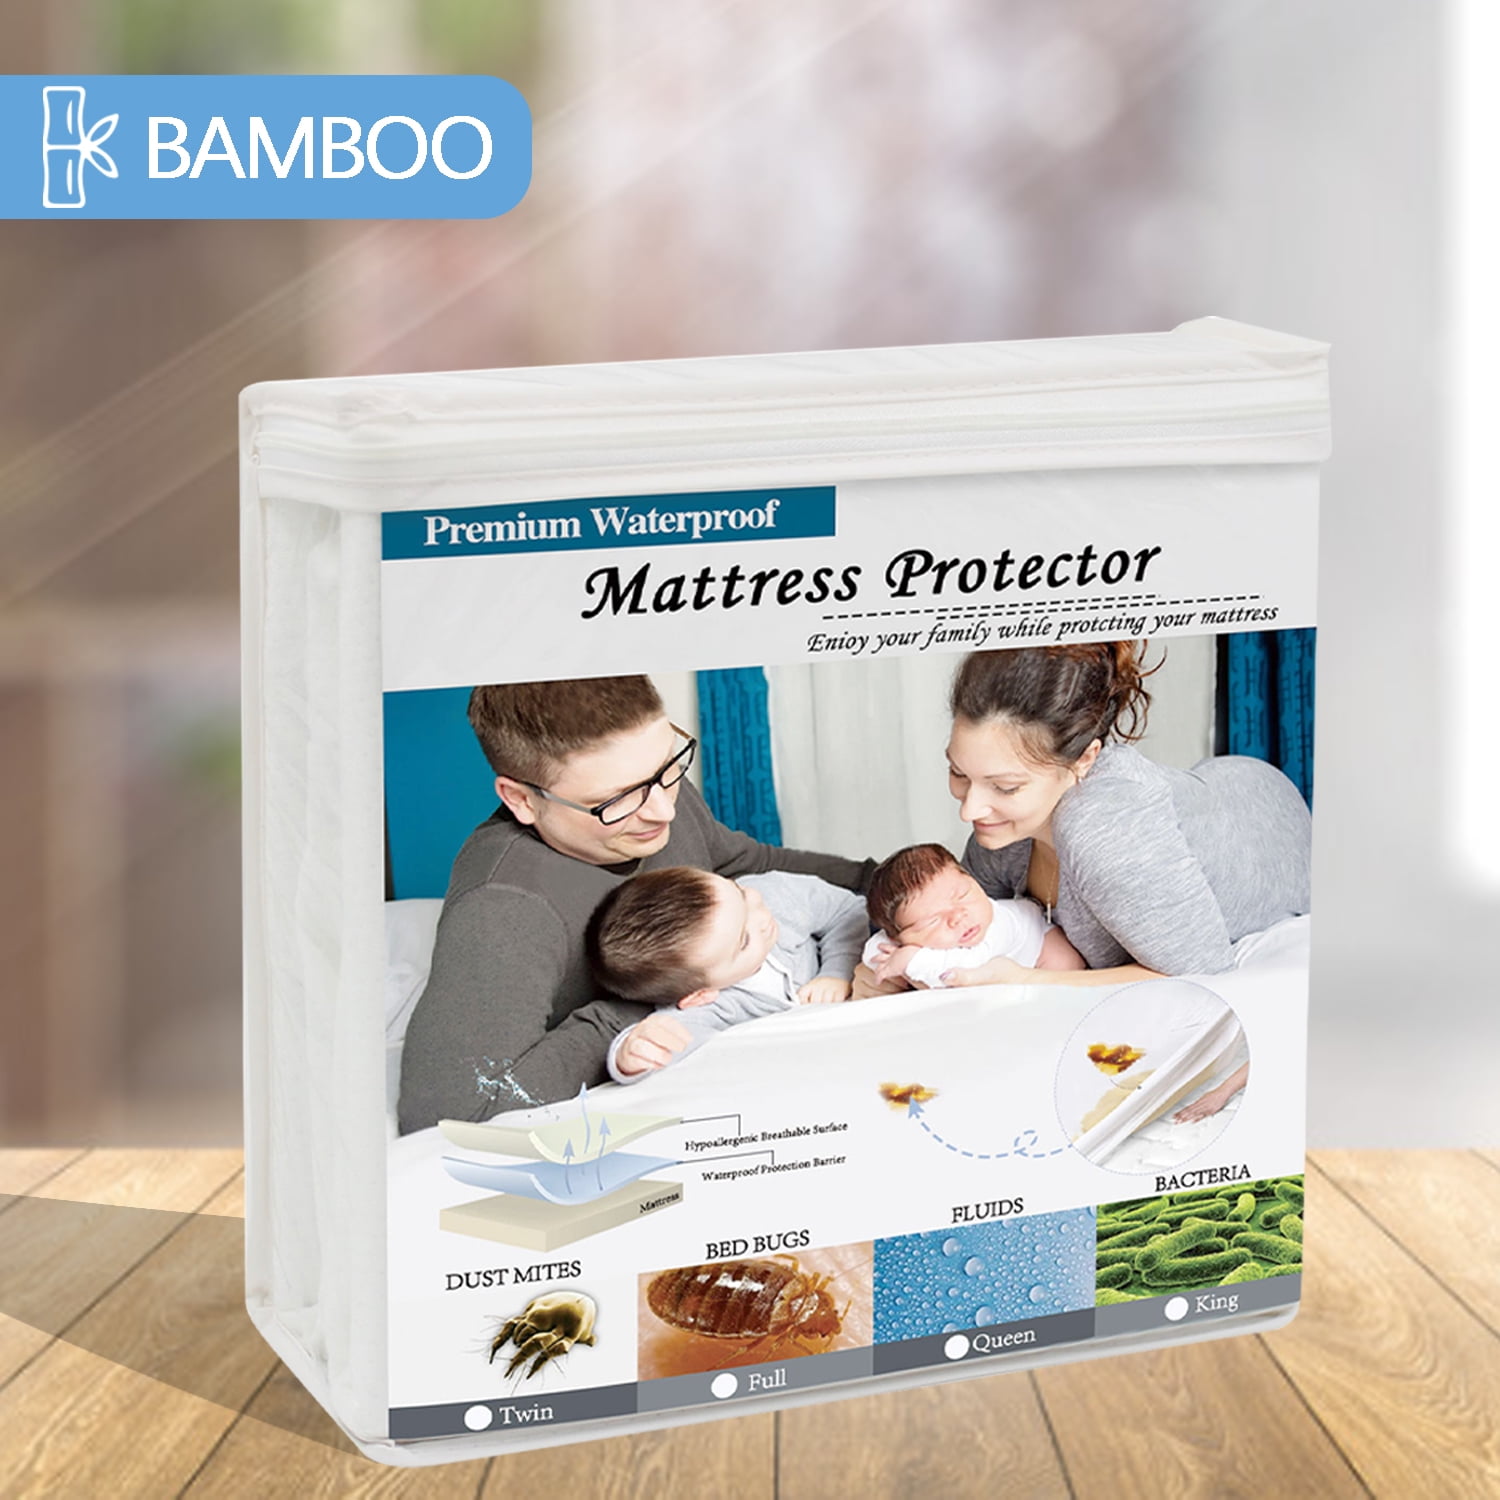 Full Size Mattress Protector,Waterproof Mattress Protector Full,Mattress  Pad Cover Noiseless,Soft Breathable Cotton Terry for Pets Kids Adults 54 x